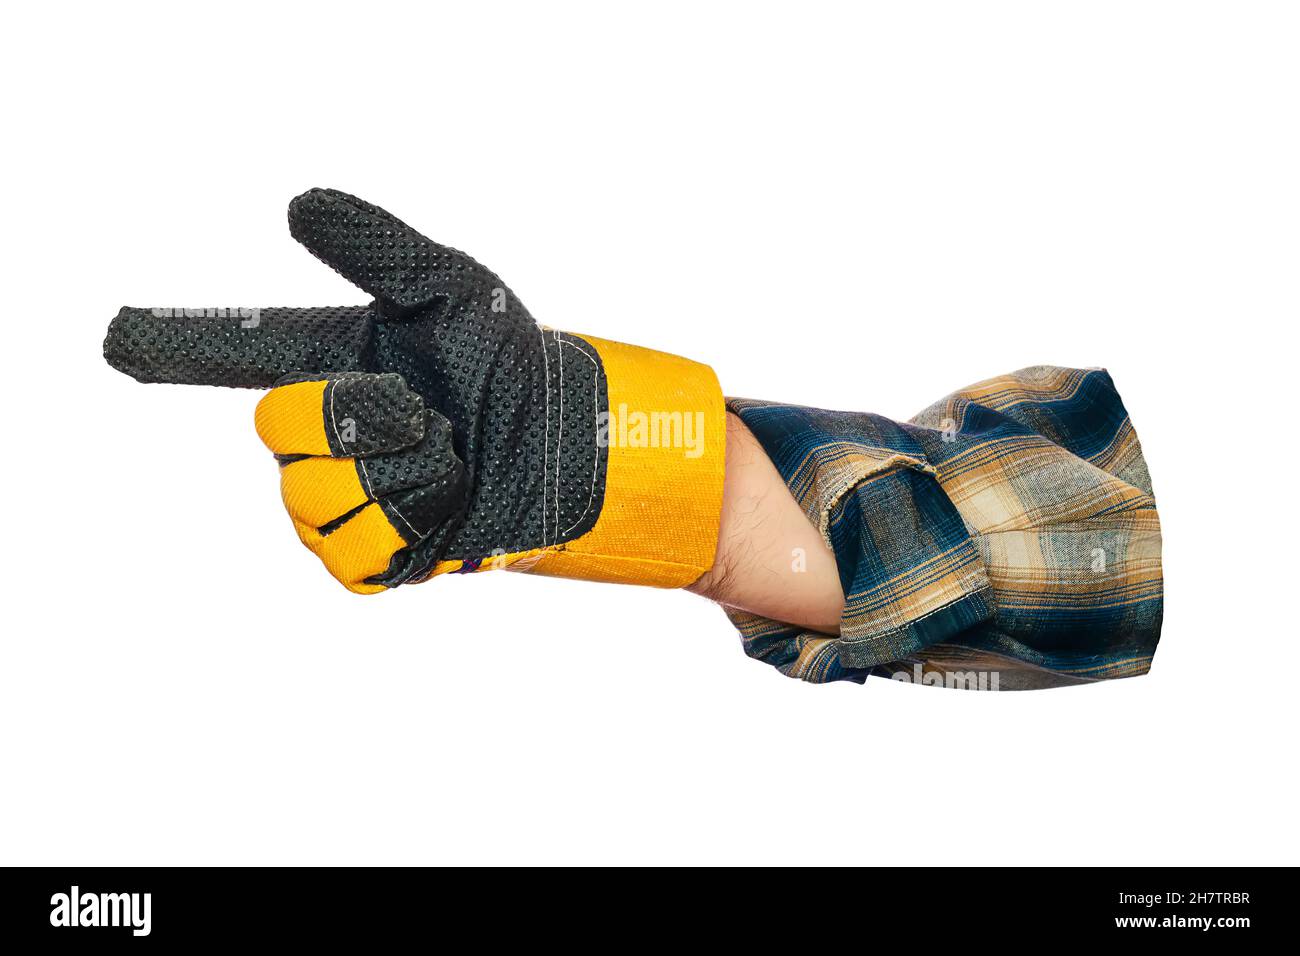 Hand of builder or contractor in protective glove is insulated on white background. Index finger points to side. Man's hand in plaid shirt. Indicates information. Concept. Construction and repair. Stock Photo